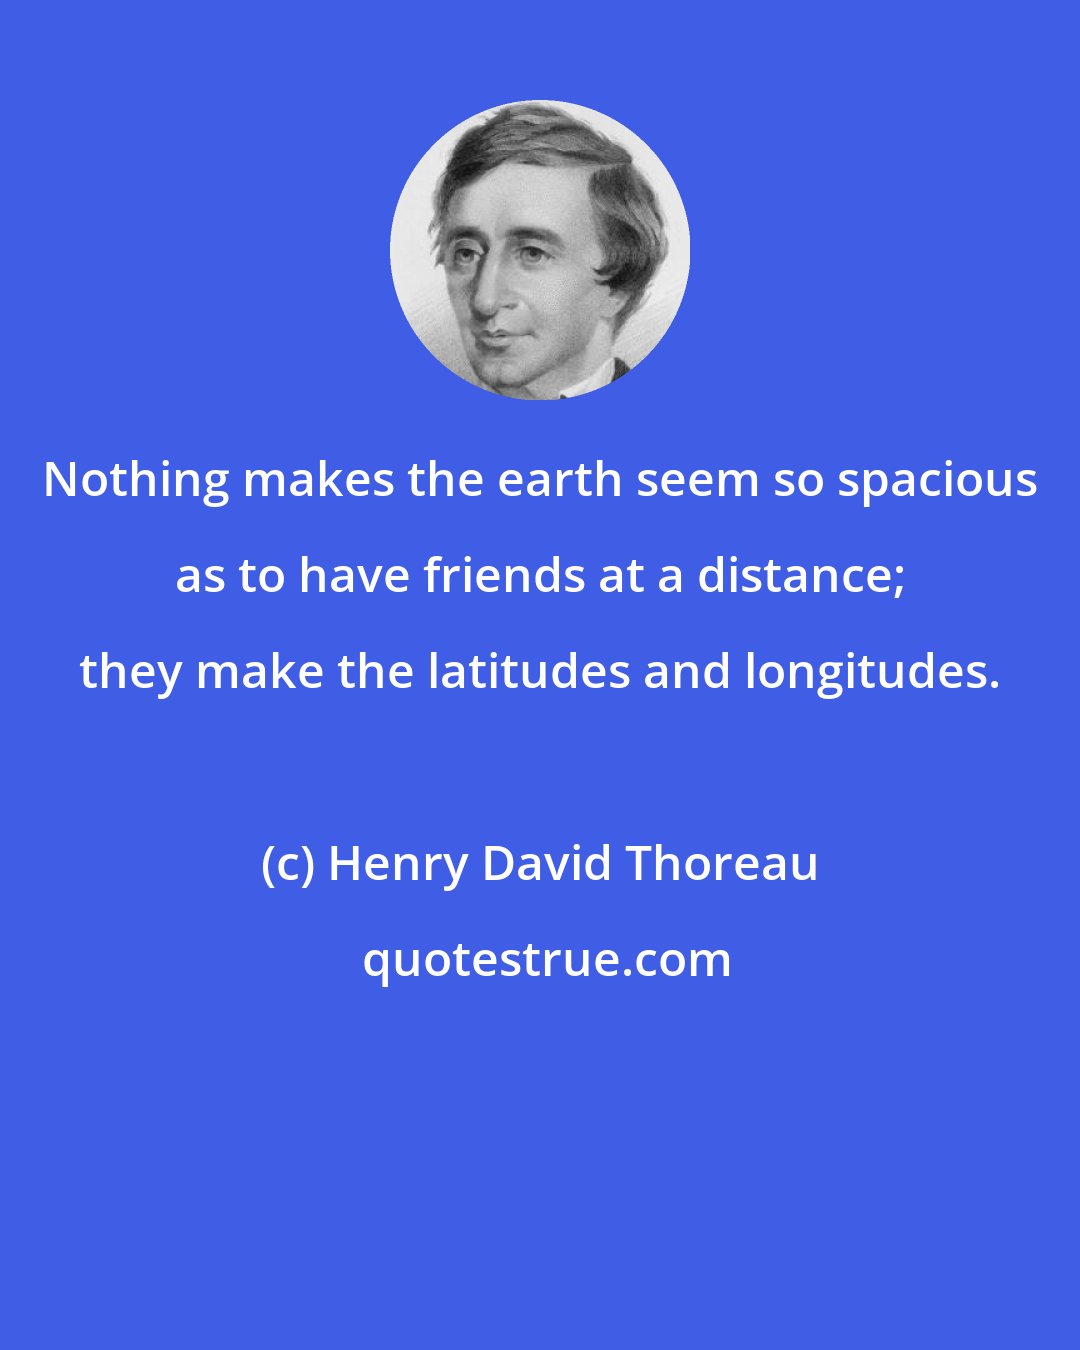 Henry David Thoreau: Nothing makes the earth seem so spacious as to have friends at a distance; they make the latitudes and longitudes.